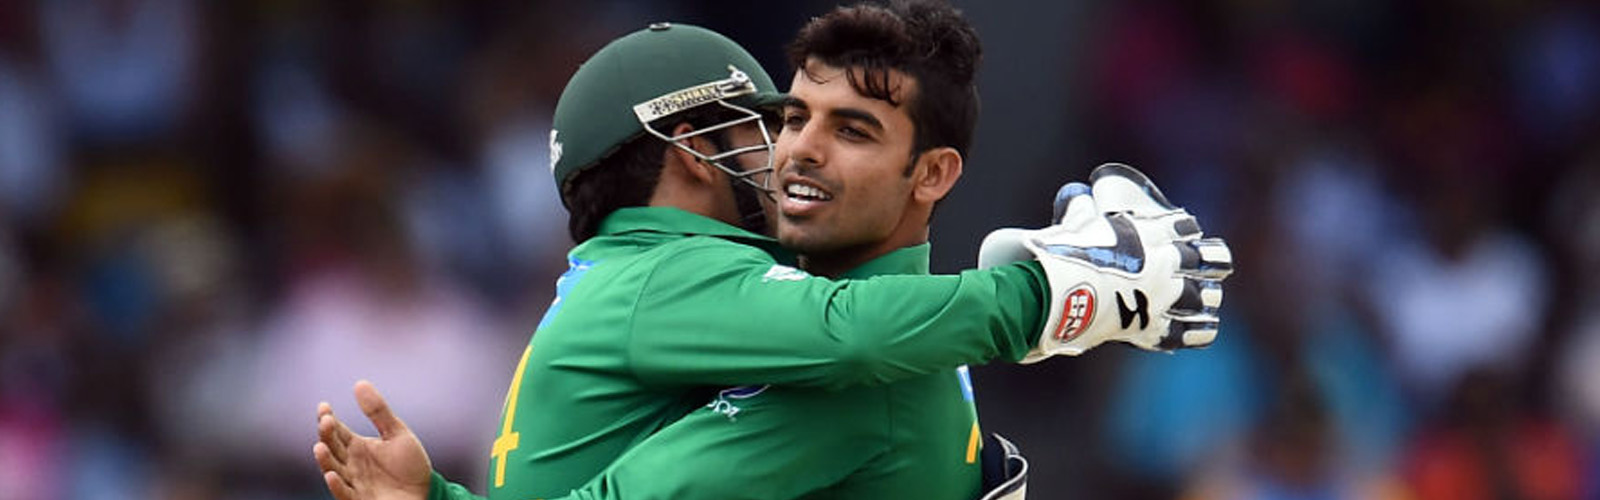 PHOTOS: Pakistan's show of strength in 1st T20 against West Indies